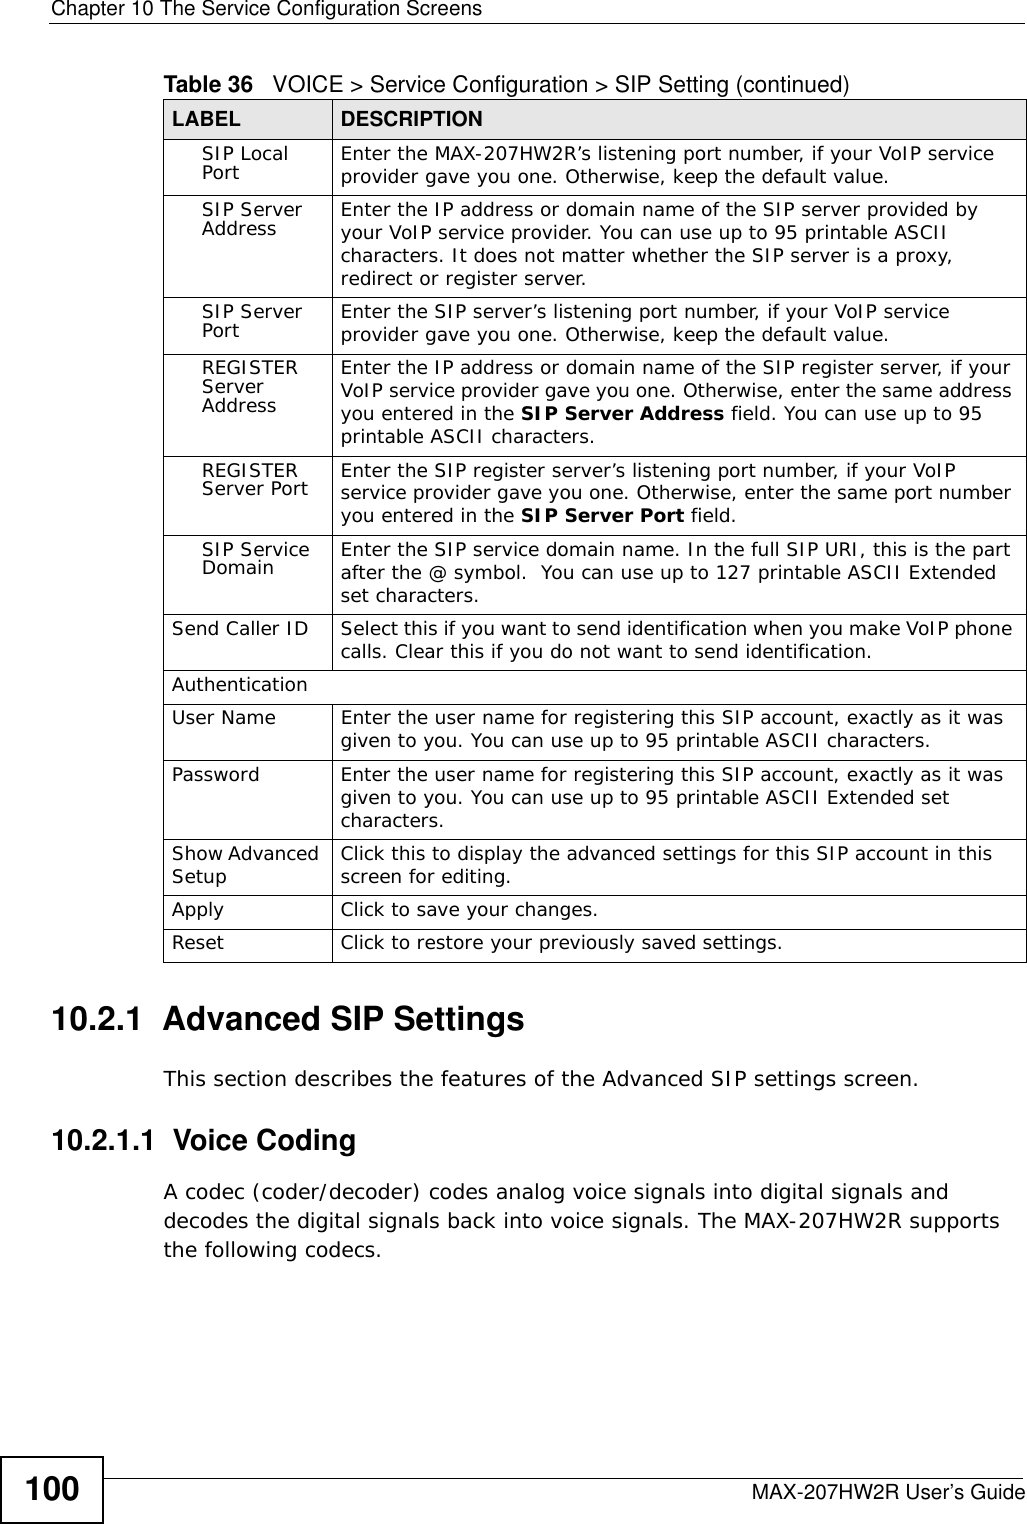 Chapter 10 The Service Configuration ScreensMAX-207HW2R User’s Guide10010.2.1  Advanced SIP SettingsThis section describes the features of the Advanced SIP settings screen.10.2.1.1  Voice CodingA codec (coder/decoder) codes analog voice signals into digital signals and decodes the digital signals back into voice signals. The MAX-207HW2R supports the following codecs.SIP Local Port Enter the MAX-207HW2R’s listening port number, if your VoIP service provider gave you one. Otherwise, keep the default value.SIP Server Address Enter the IP address or domain name of the SIP server provided by your VoIP service provider. You can use up to 95 printable ASCII characters. It does not matter whether the SIP server is a proxy, redirect or register server.SIP Server Port Enter the SIP server’s listening port number, if your VoIP service provider gave you one. Otherwise, keep the default value.REGISTER Server AddressEnter the IP address or domain name of the SIP register server, if your VoIP service provider gave you one. Otherwise, enter the same address you entered in the SIP Server Address field. You can use up to 95 printable ASCII characters.REGISTER Server Port Enter the SIP register server’s listening port number, if your VoIP service provider gave you one. Otherwise, enter the same port number you entered in the SIP Server Port field.SIP Service Domain Enter the SIP service domain name. In the full SIP URI, this is the part after the @ symbol.  You can use up to 127 printable ASCII Extended set characters.Send Caller ID Select this if you want to send identification when you make VoIP phone calls. Clear this if you do not want to send identification.AuthenticationUser Name Enter the user name for registering this SIP account, exactly as it was given to you. You can use up to 95 printable ASCII characters.Password Enter the user name for registering this SIP account, exactly as it was given to you. You can use up to 95 printable ASCII Extended set characters.Show Advanced Setup Click this to display the advanced settings for this SIP account in this screen for editing.Apply Click to save your changes.Reset Click to restore your previously saved settings.Table 36   VOICE &gt; Service Configuration &gt; SIP Setting (continued)LABEL DESCRIPTION